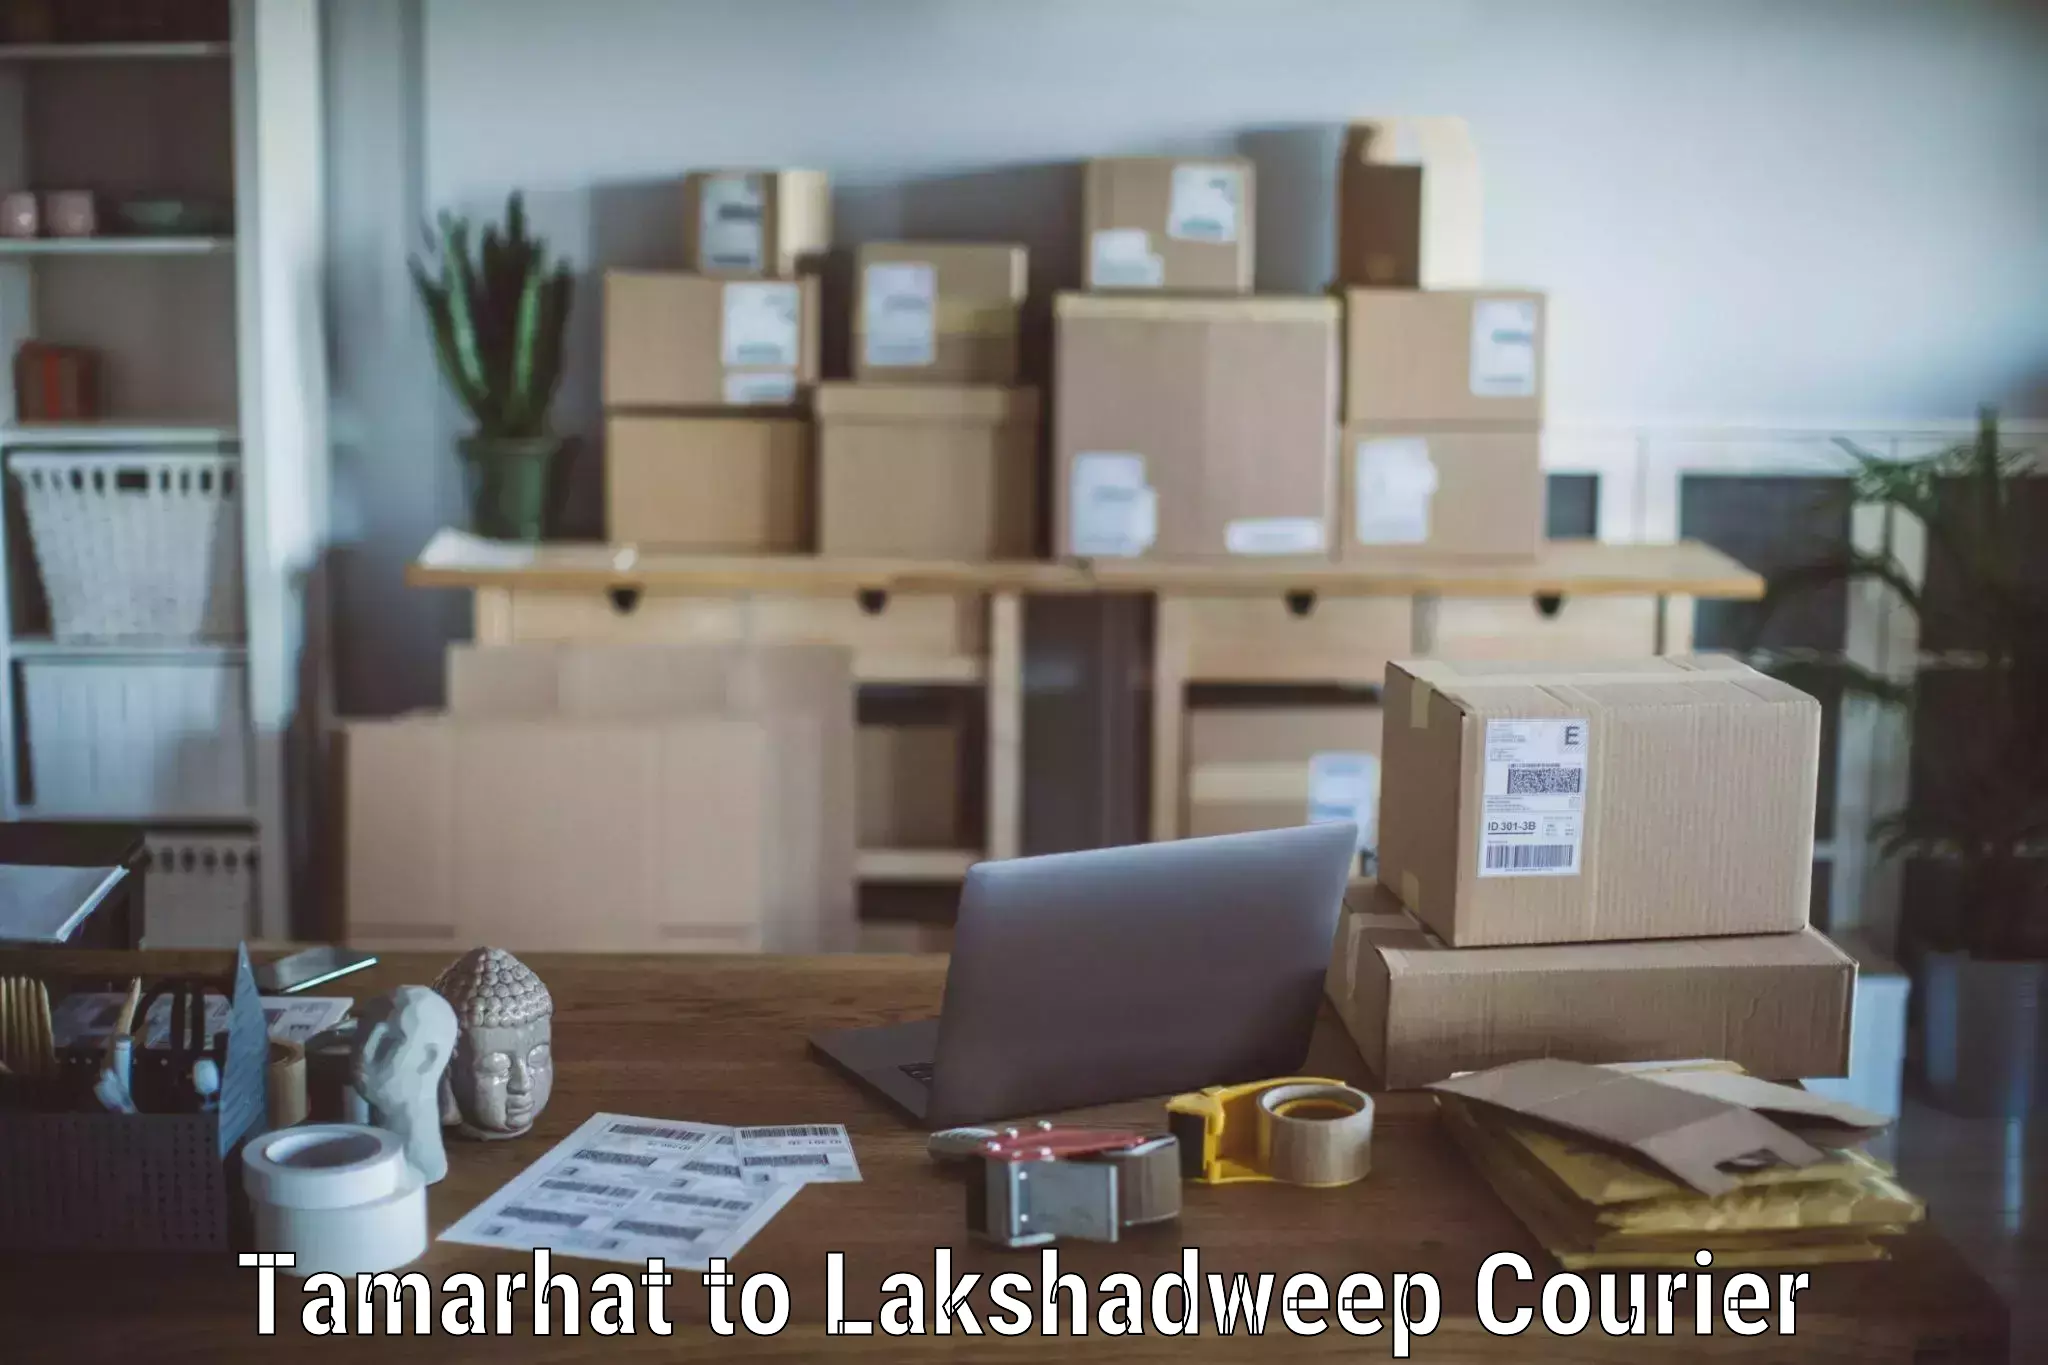 Trusted relocation experts in Tamarhat to Lakshadweep